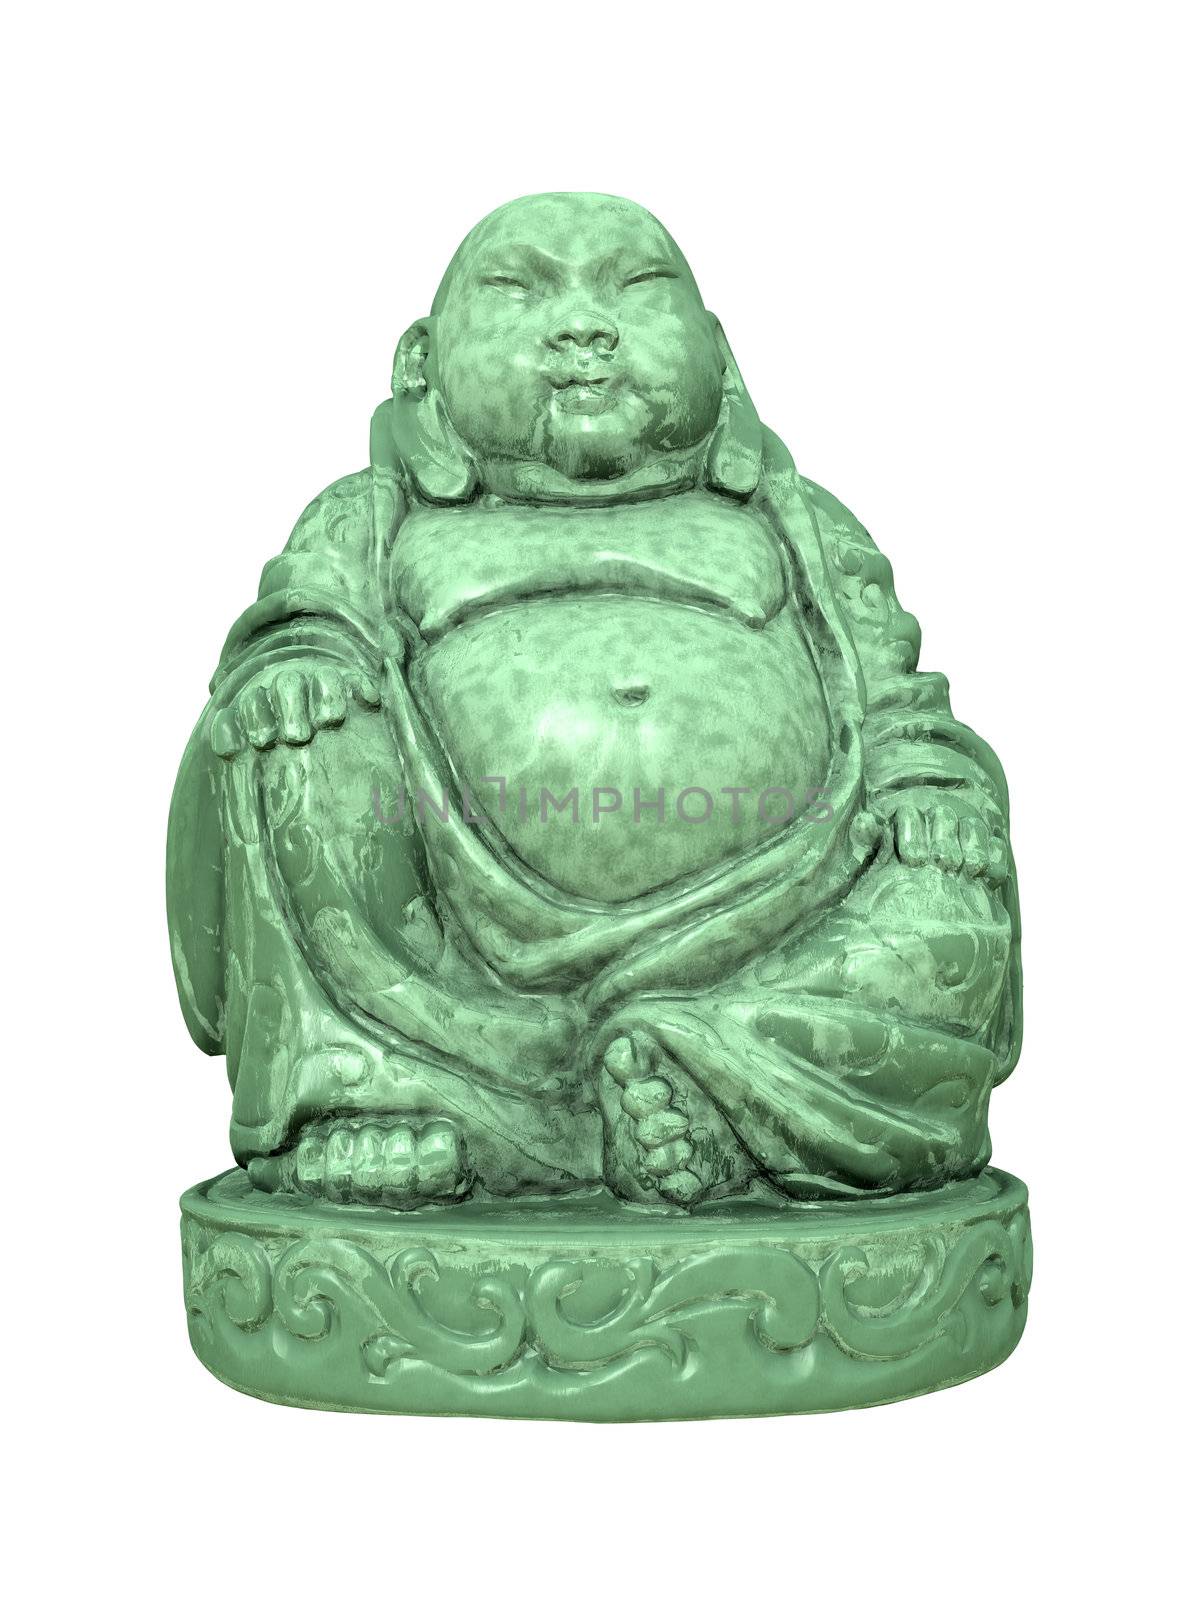 An image of a beautiful green buddha isolated on white